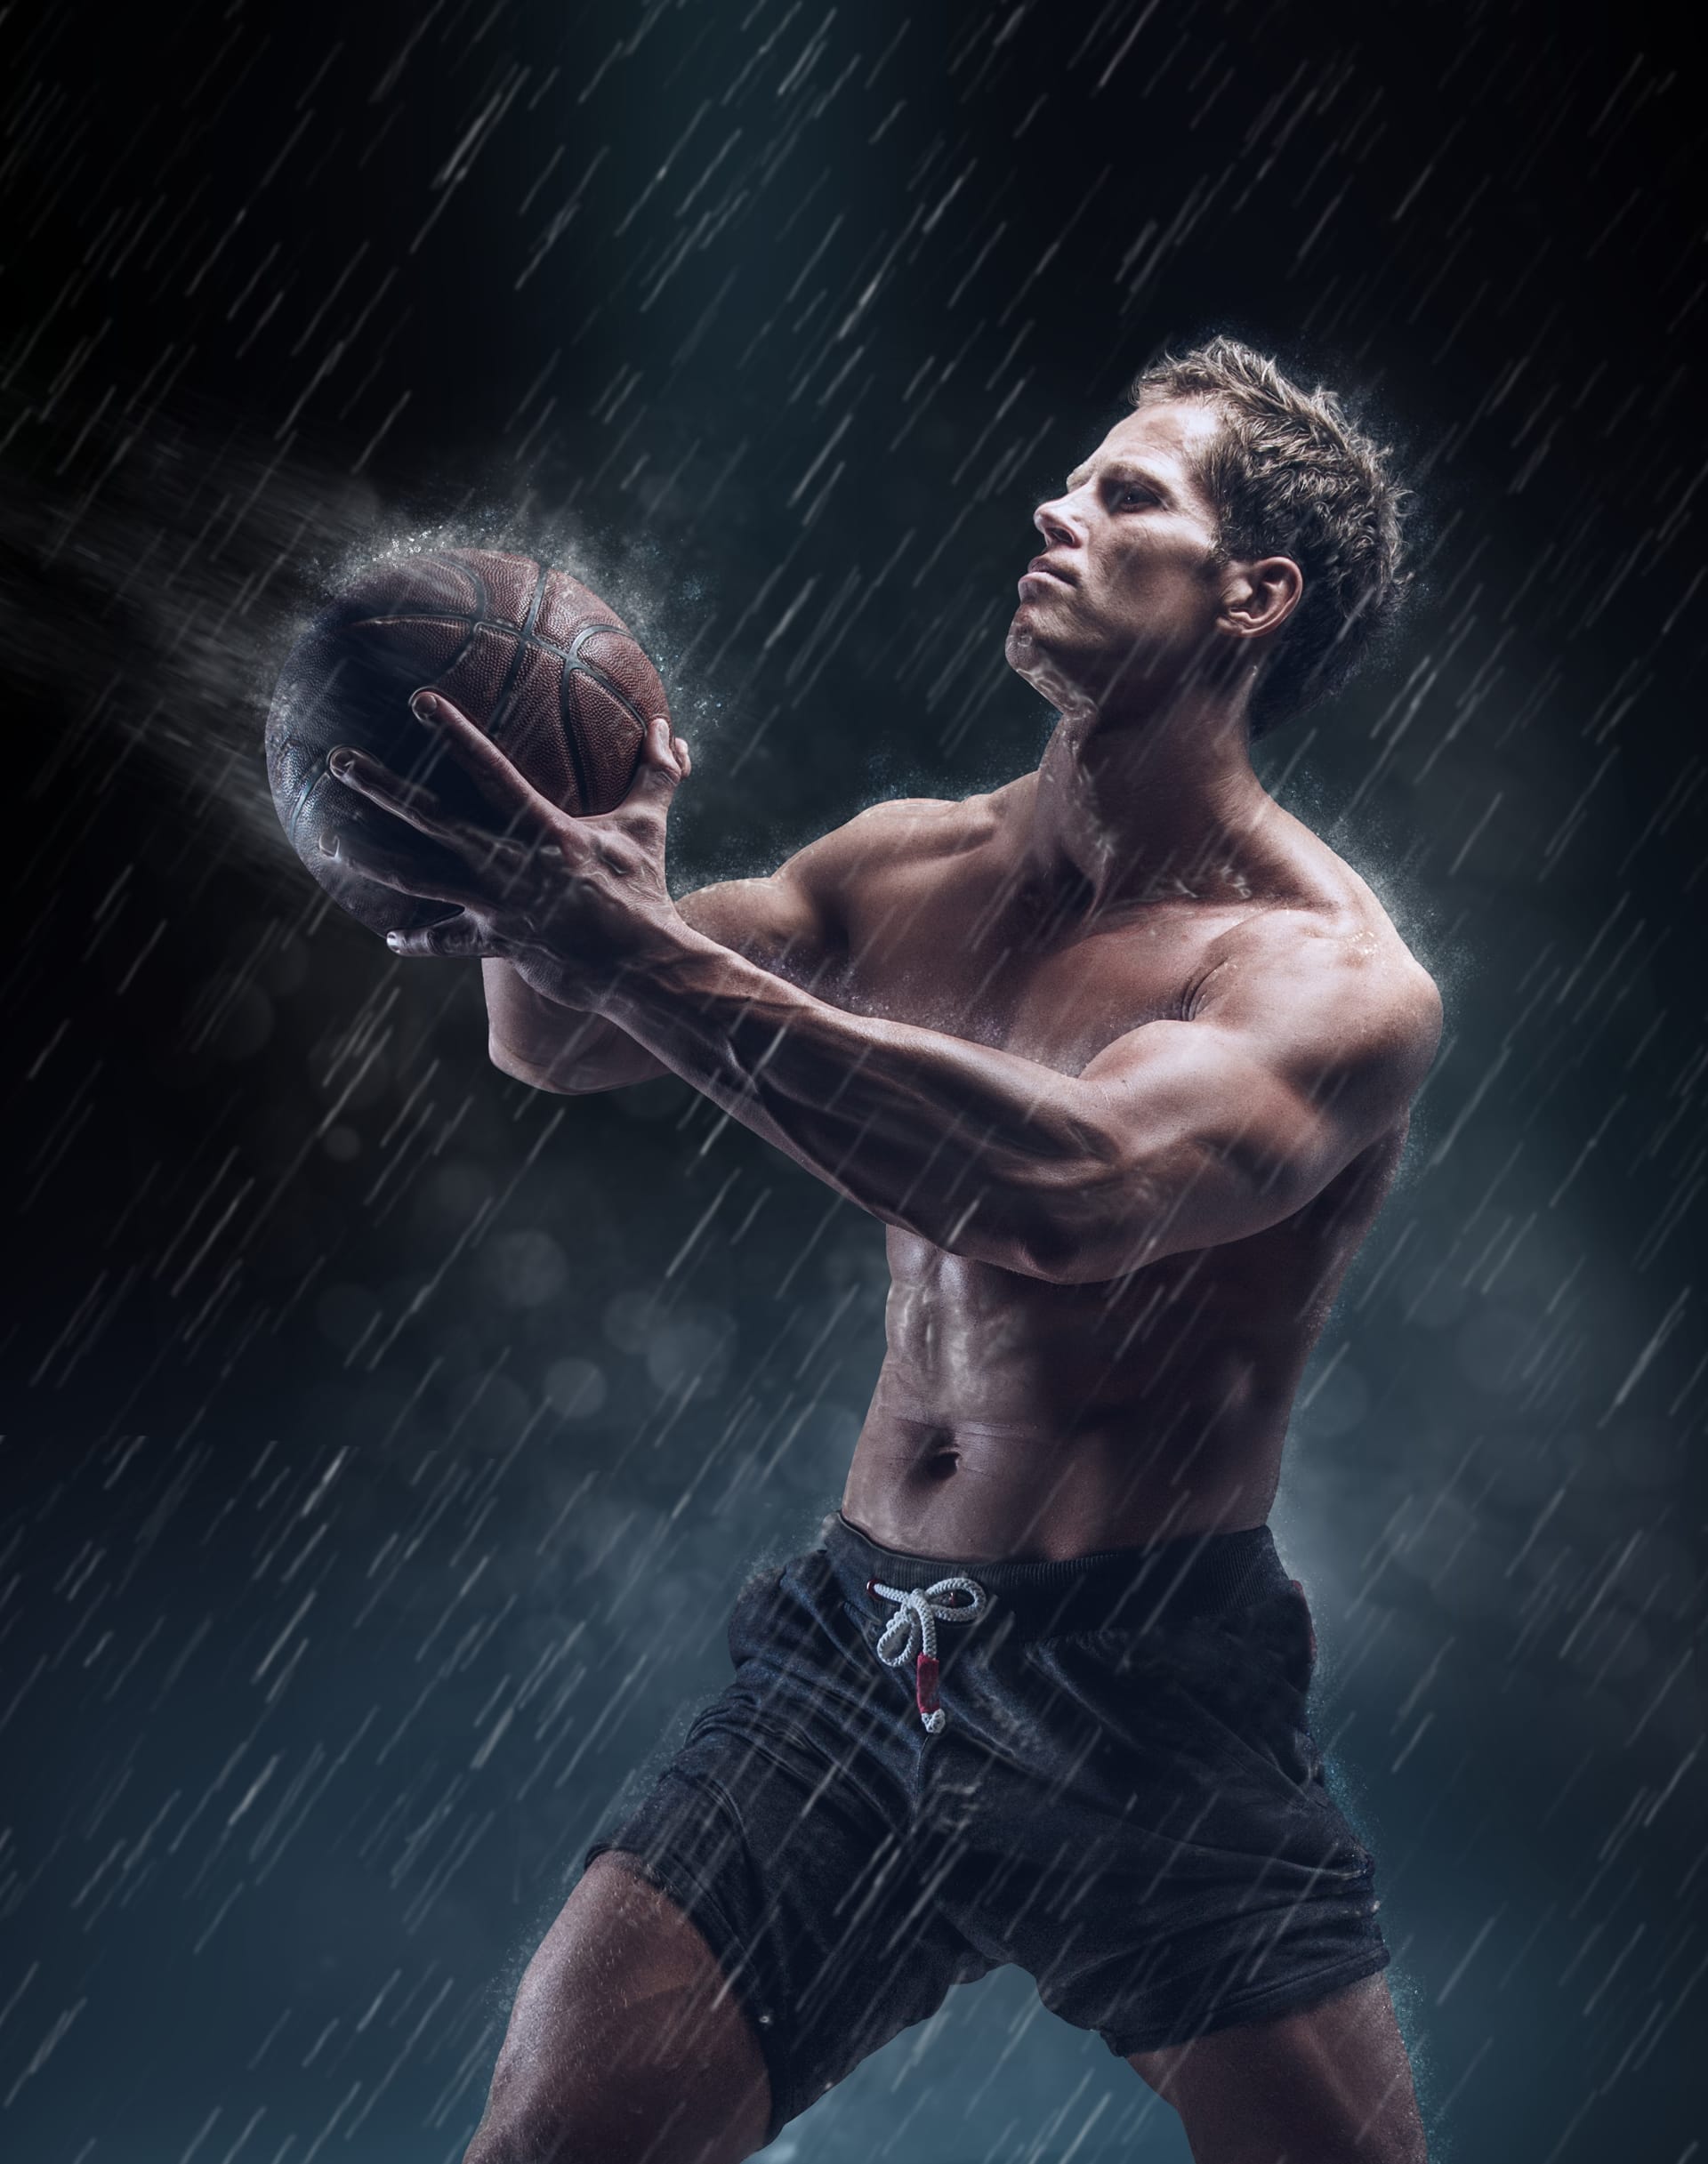 Artistic portrait shirtless wet bascetball player droplets image